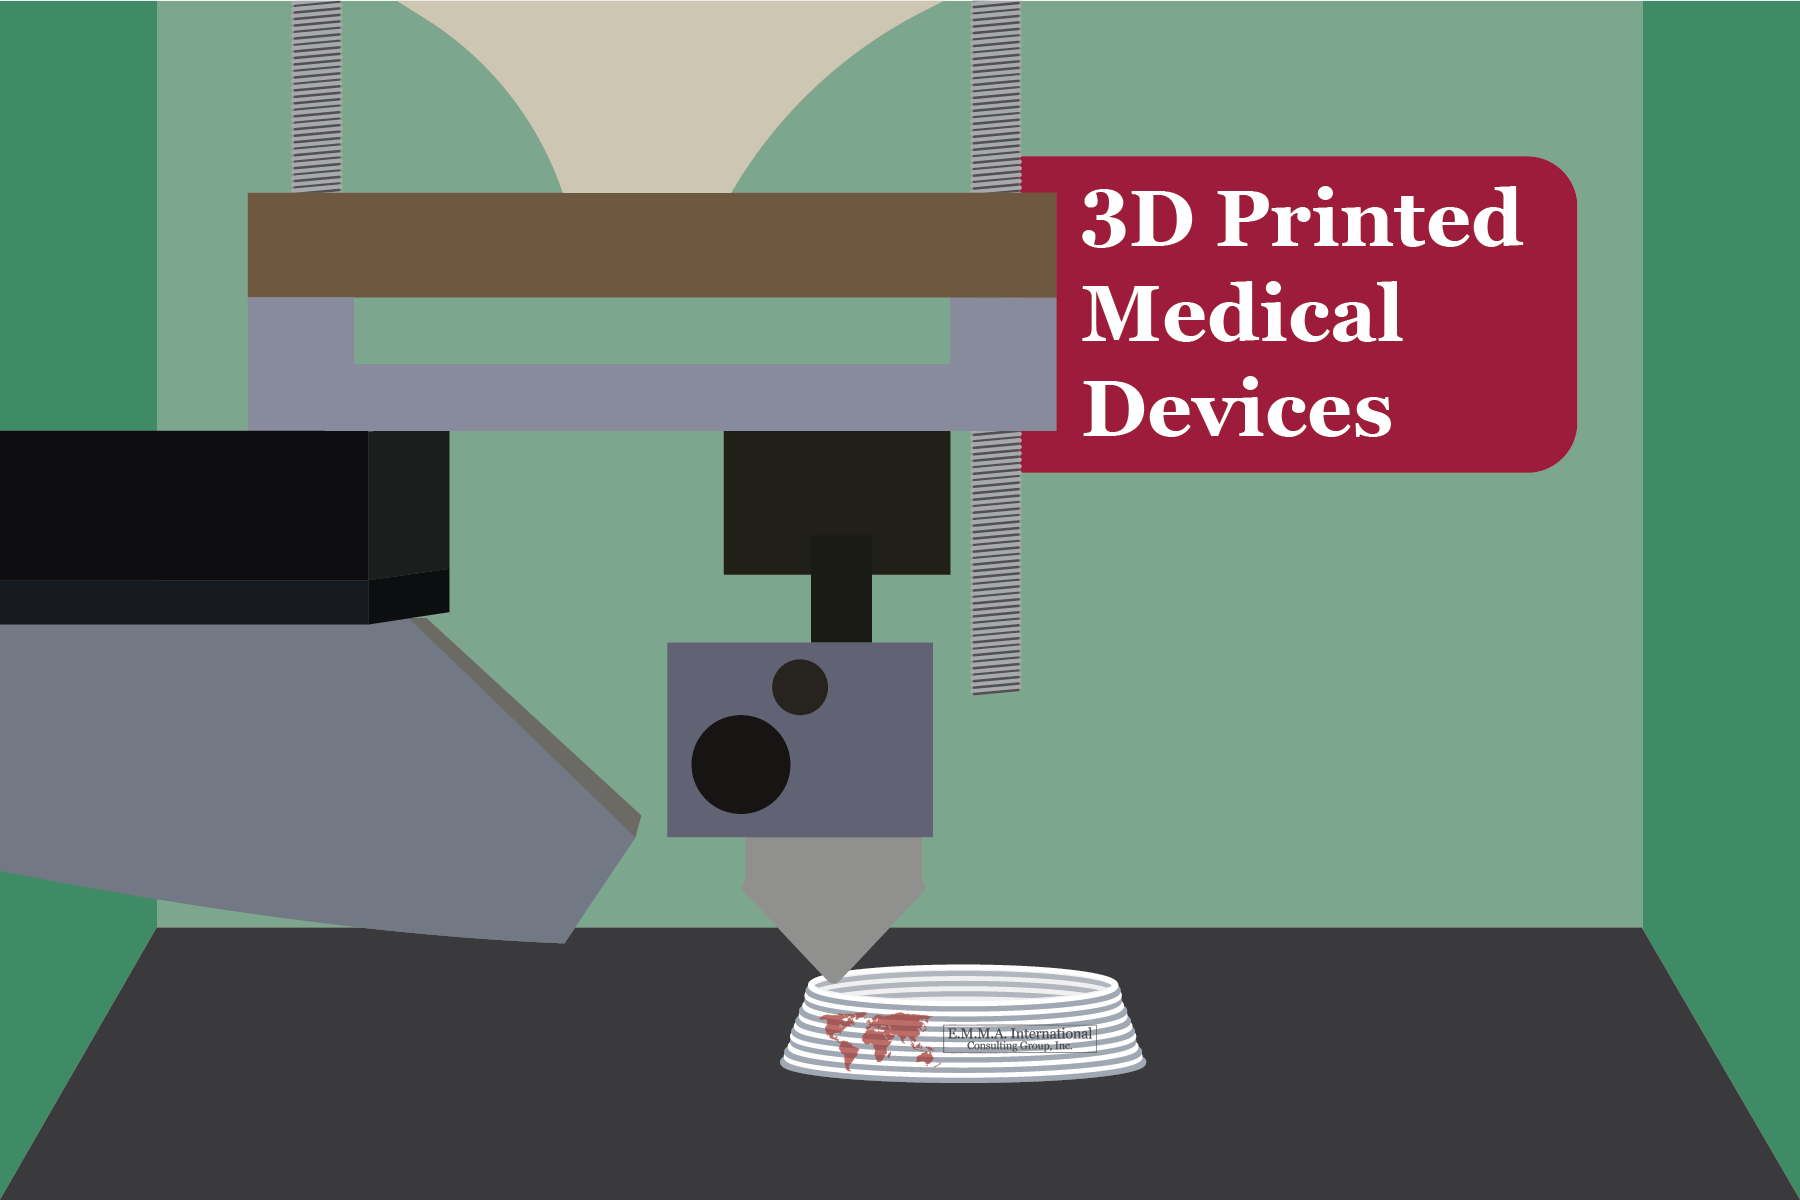 3D Printed Medical Devices